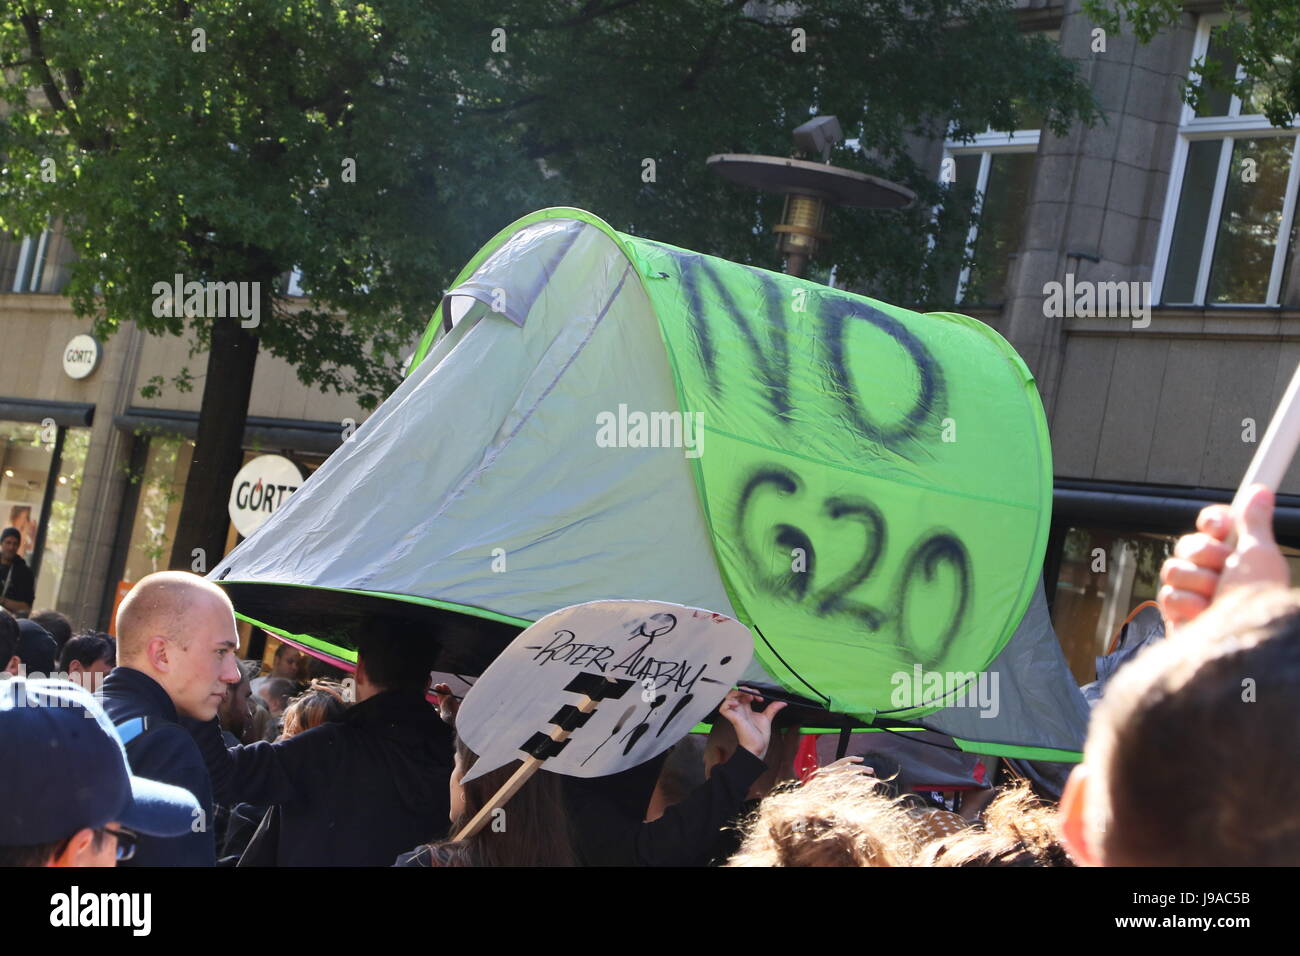 Hamburg, Germany, 31st May, 2017. Protesters carrying a tent with the inscription 'no G20' during a demonstration against the G20 summit held at Moenckebergstrasse, Hamburg, Germany, 31.05.2017. Credit: Christopher Tamcke/AlamyLiveNews Stock Photo